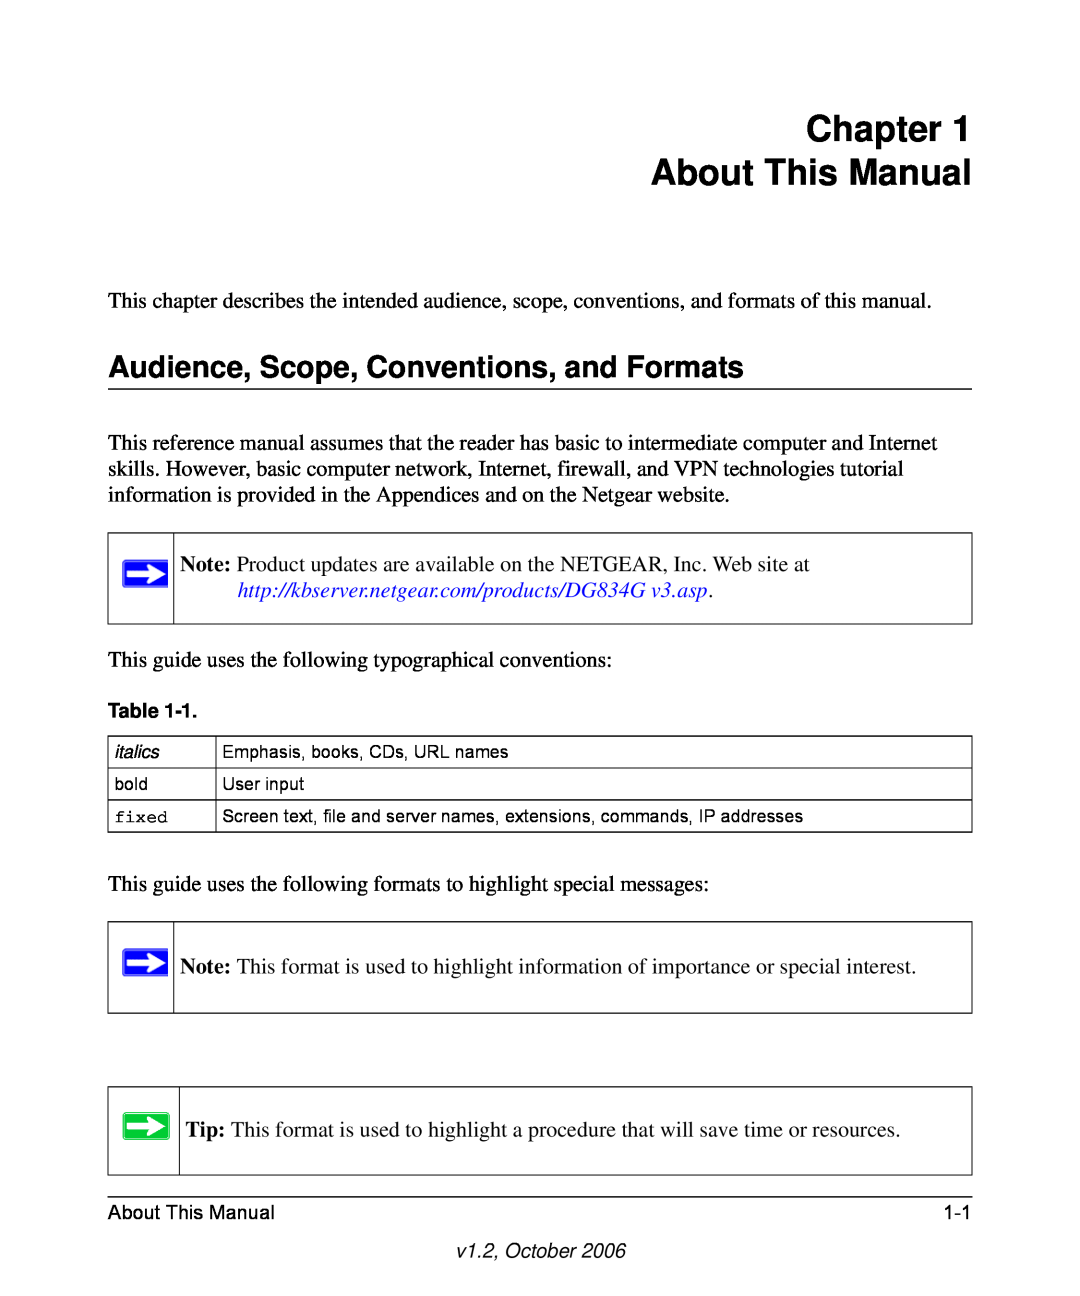 NETGEAR DG834G manual Chapter About This Manual, Audience, Scope, Conventions, and Formats 